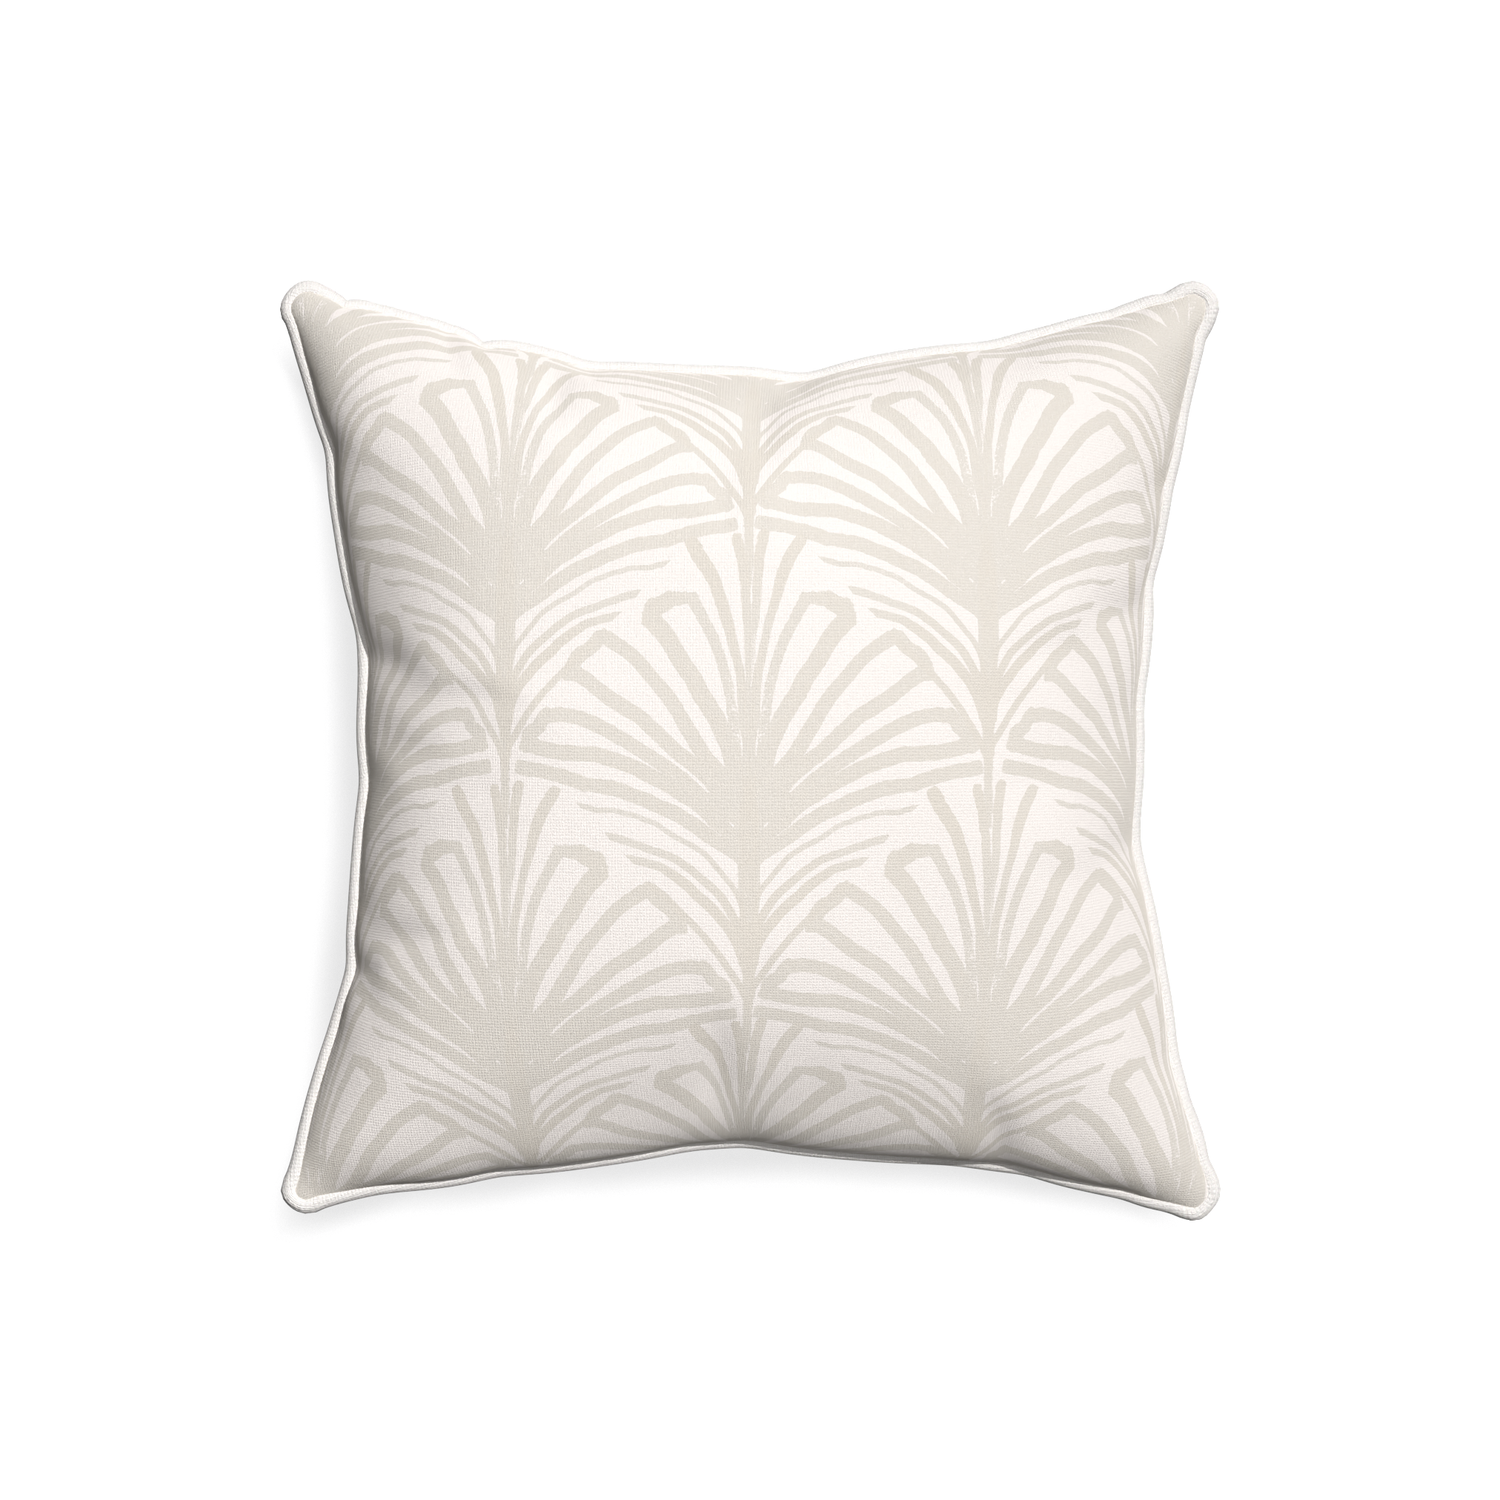 20-square suzy sand custom pillow with snow piping on white background